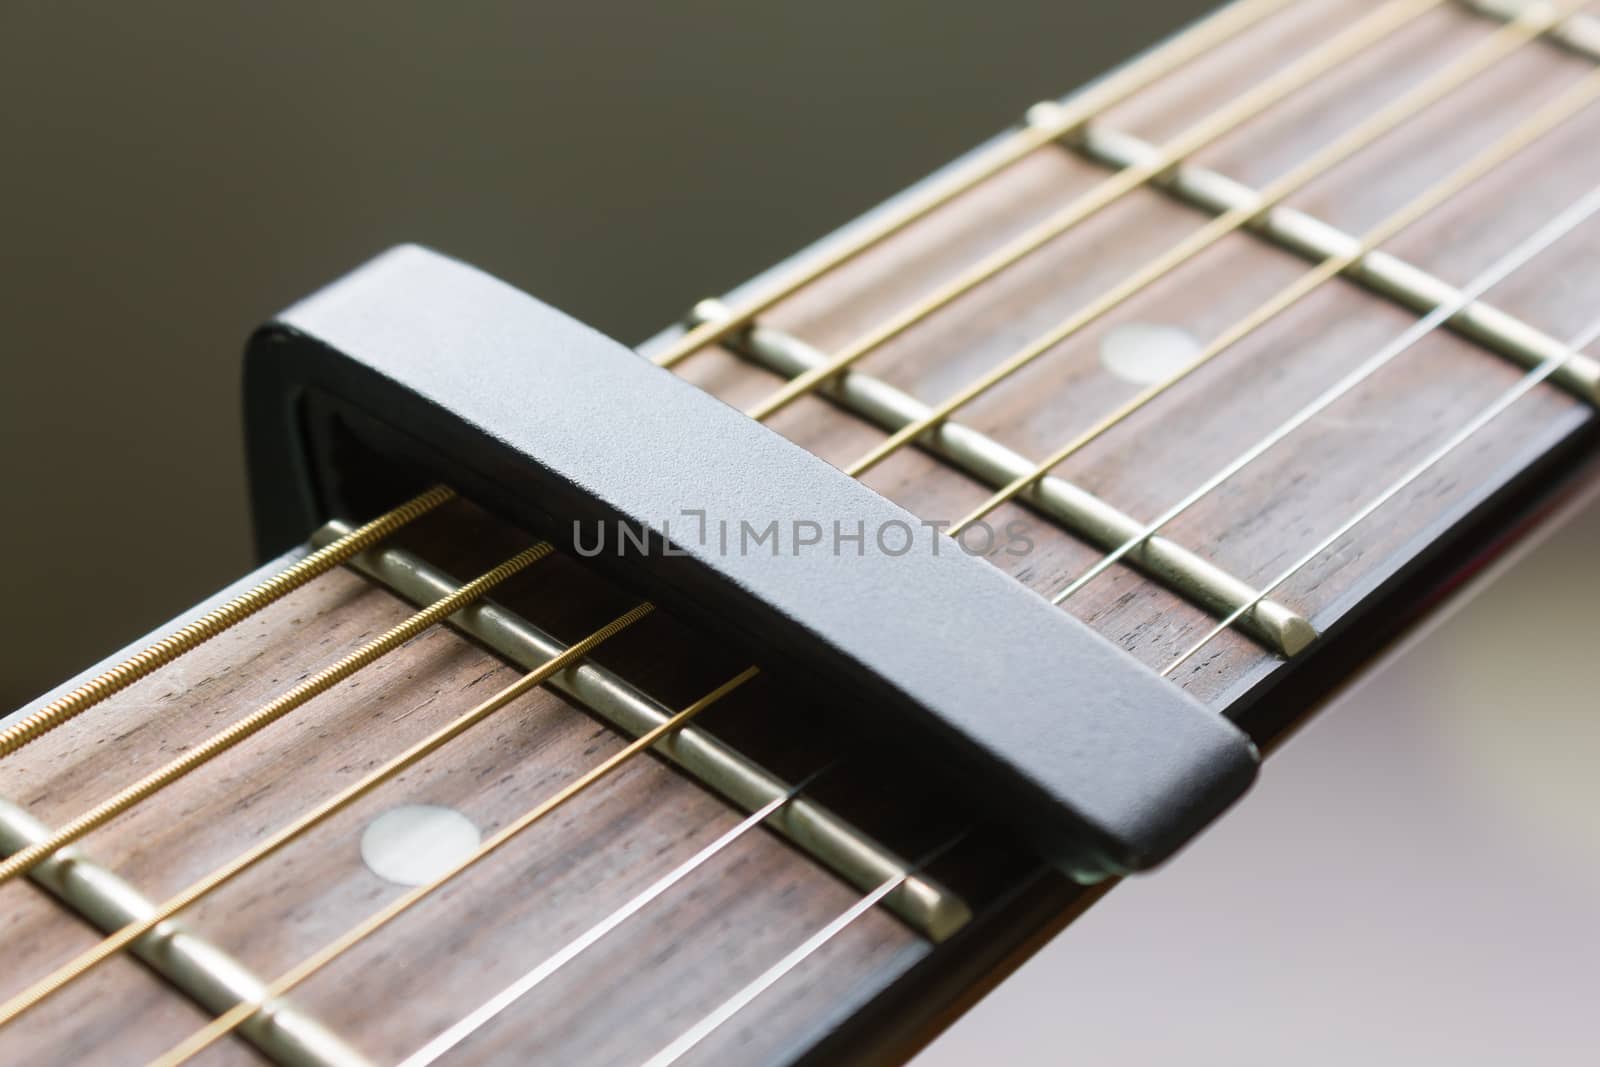 Black Capo on Acoustic Guitar String and Fingerboard with Soft Natural Light in Close up View